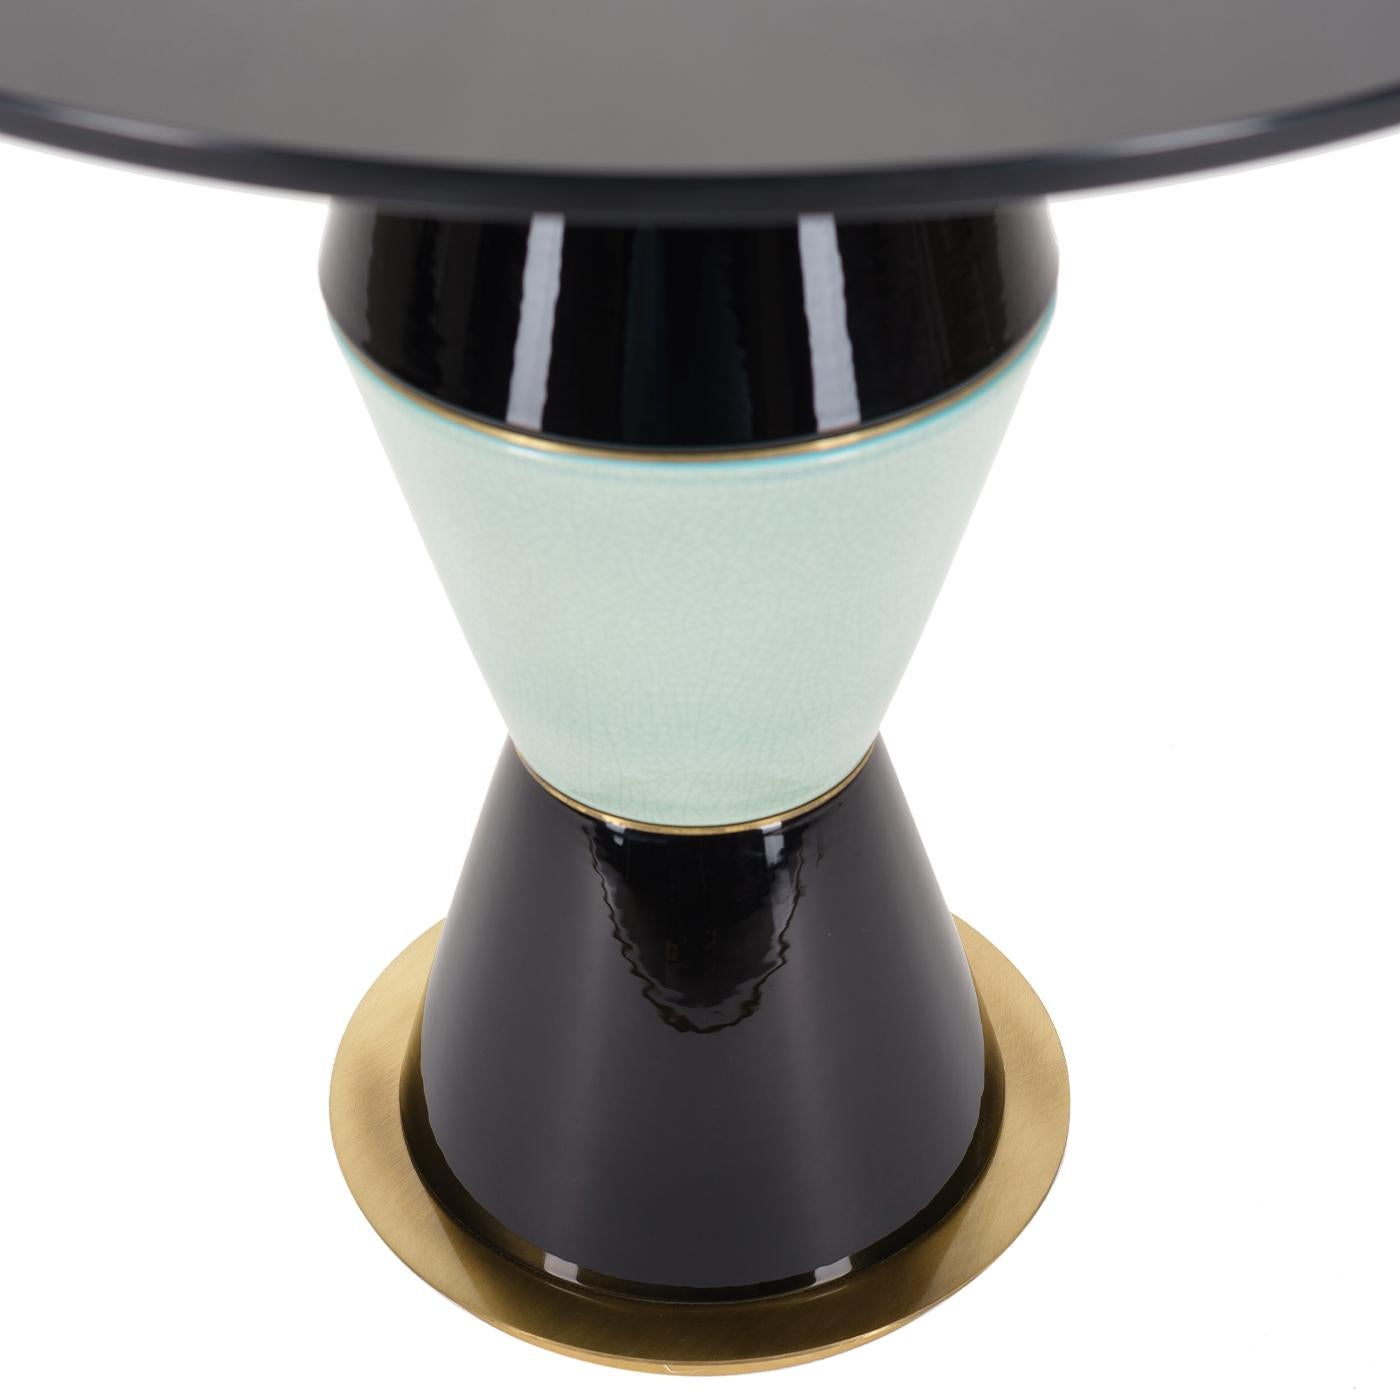 An extravagant design and the perfect addition to an eclectic living room decor, this gorgeous side table is distinguished by an intriguing base comprised of three ceramic elements boasting two colors. Resting on a round brass plate, the round top